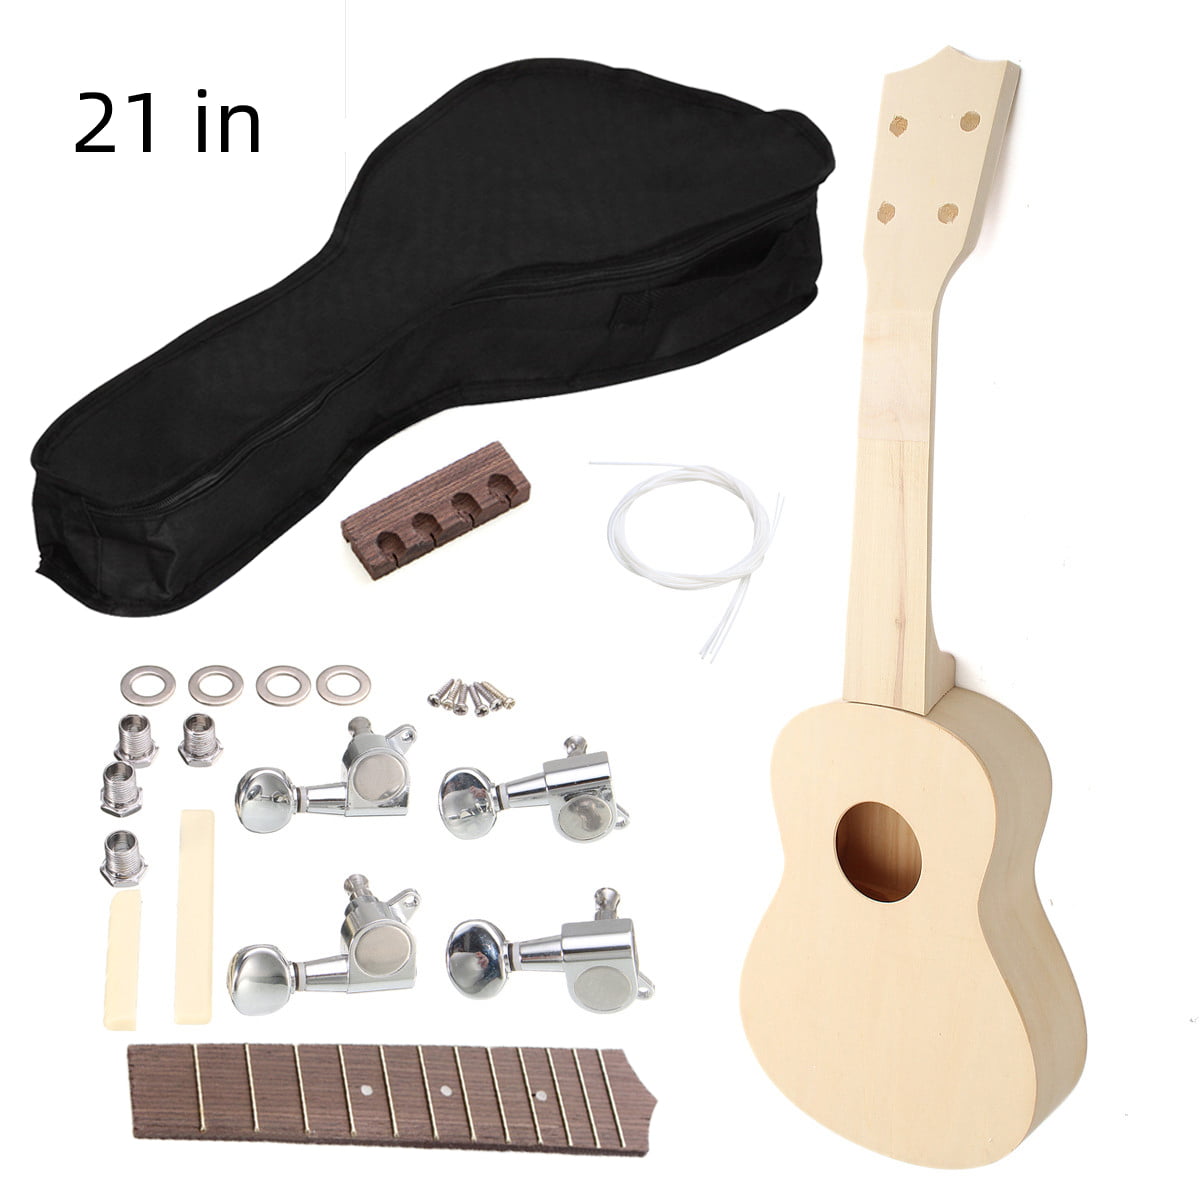 Build-It-Yourself DIY Soprano Ukulele Kit Sounds Great A Fun and Easy Project 